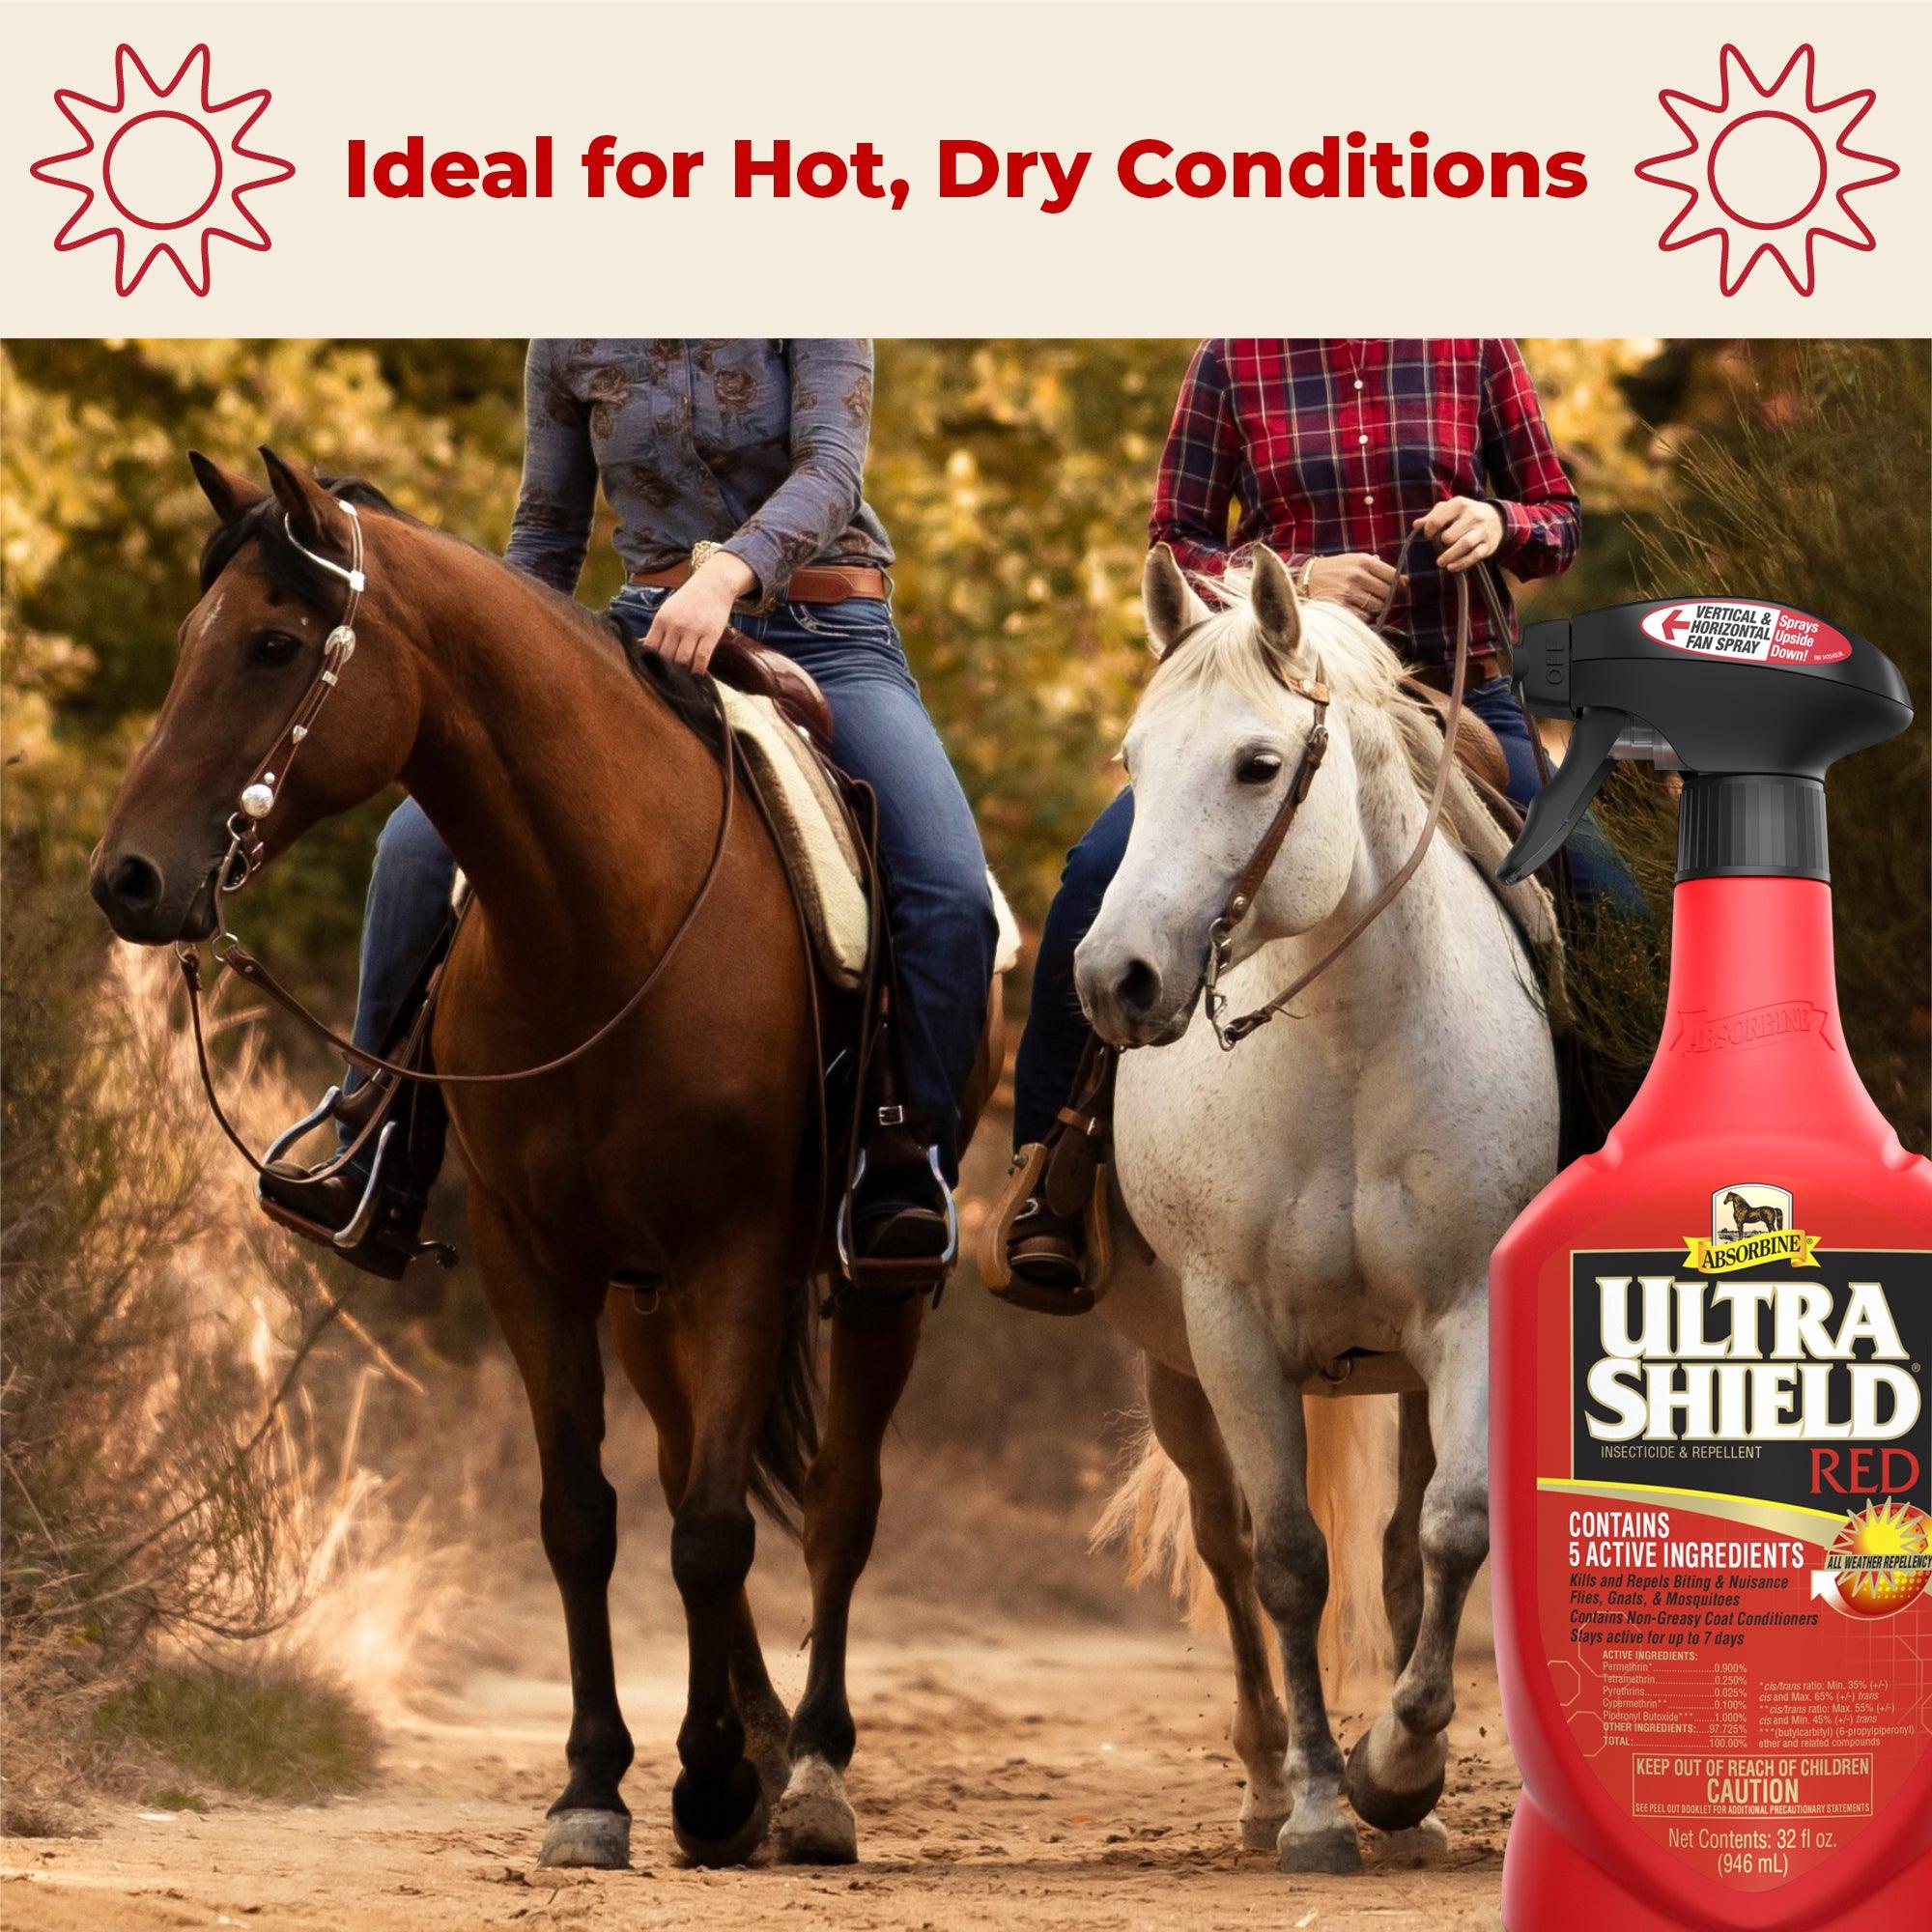 Two women riding down a dusty trail on their horses.  UltraShield Red ideal for hot, dry conditions.